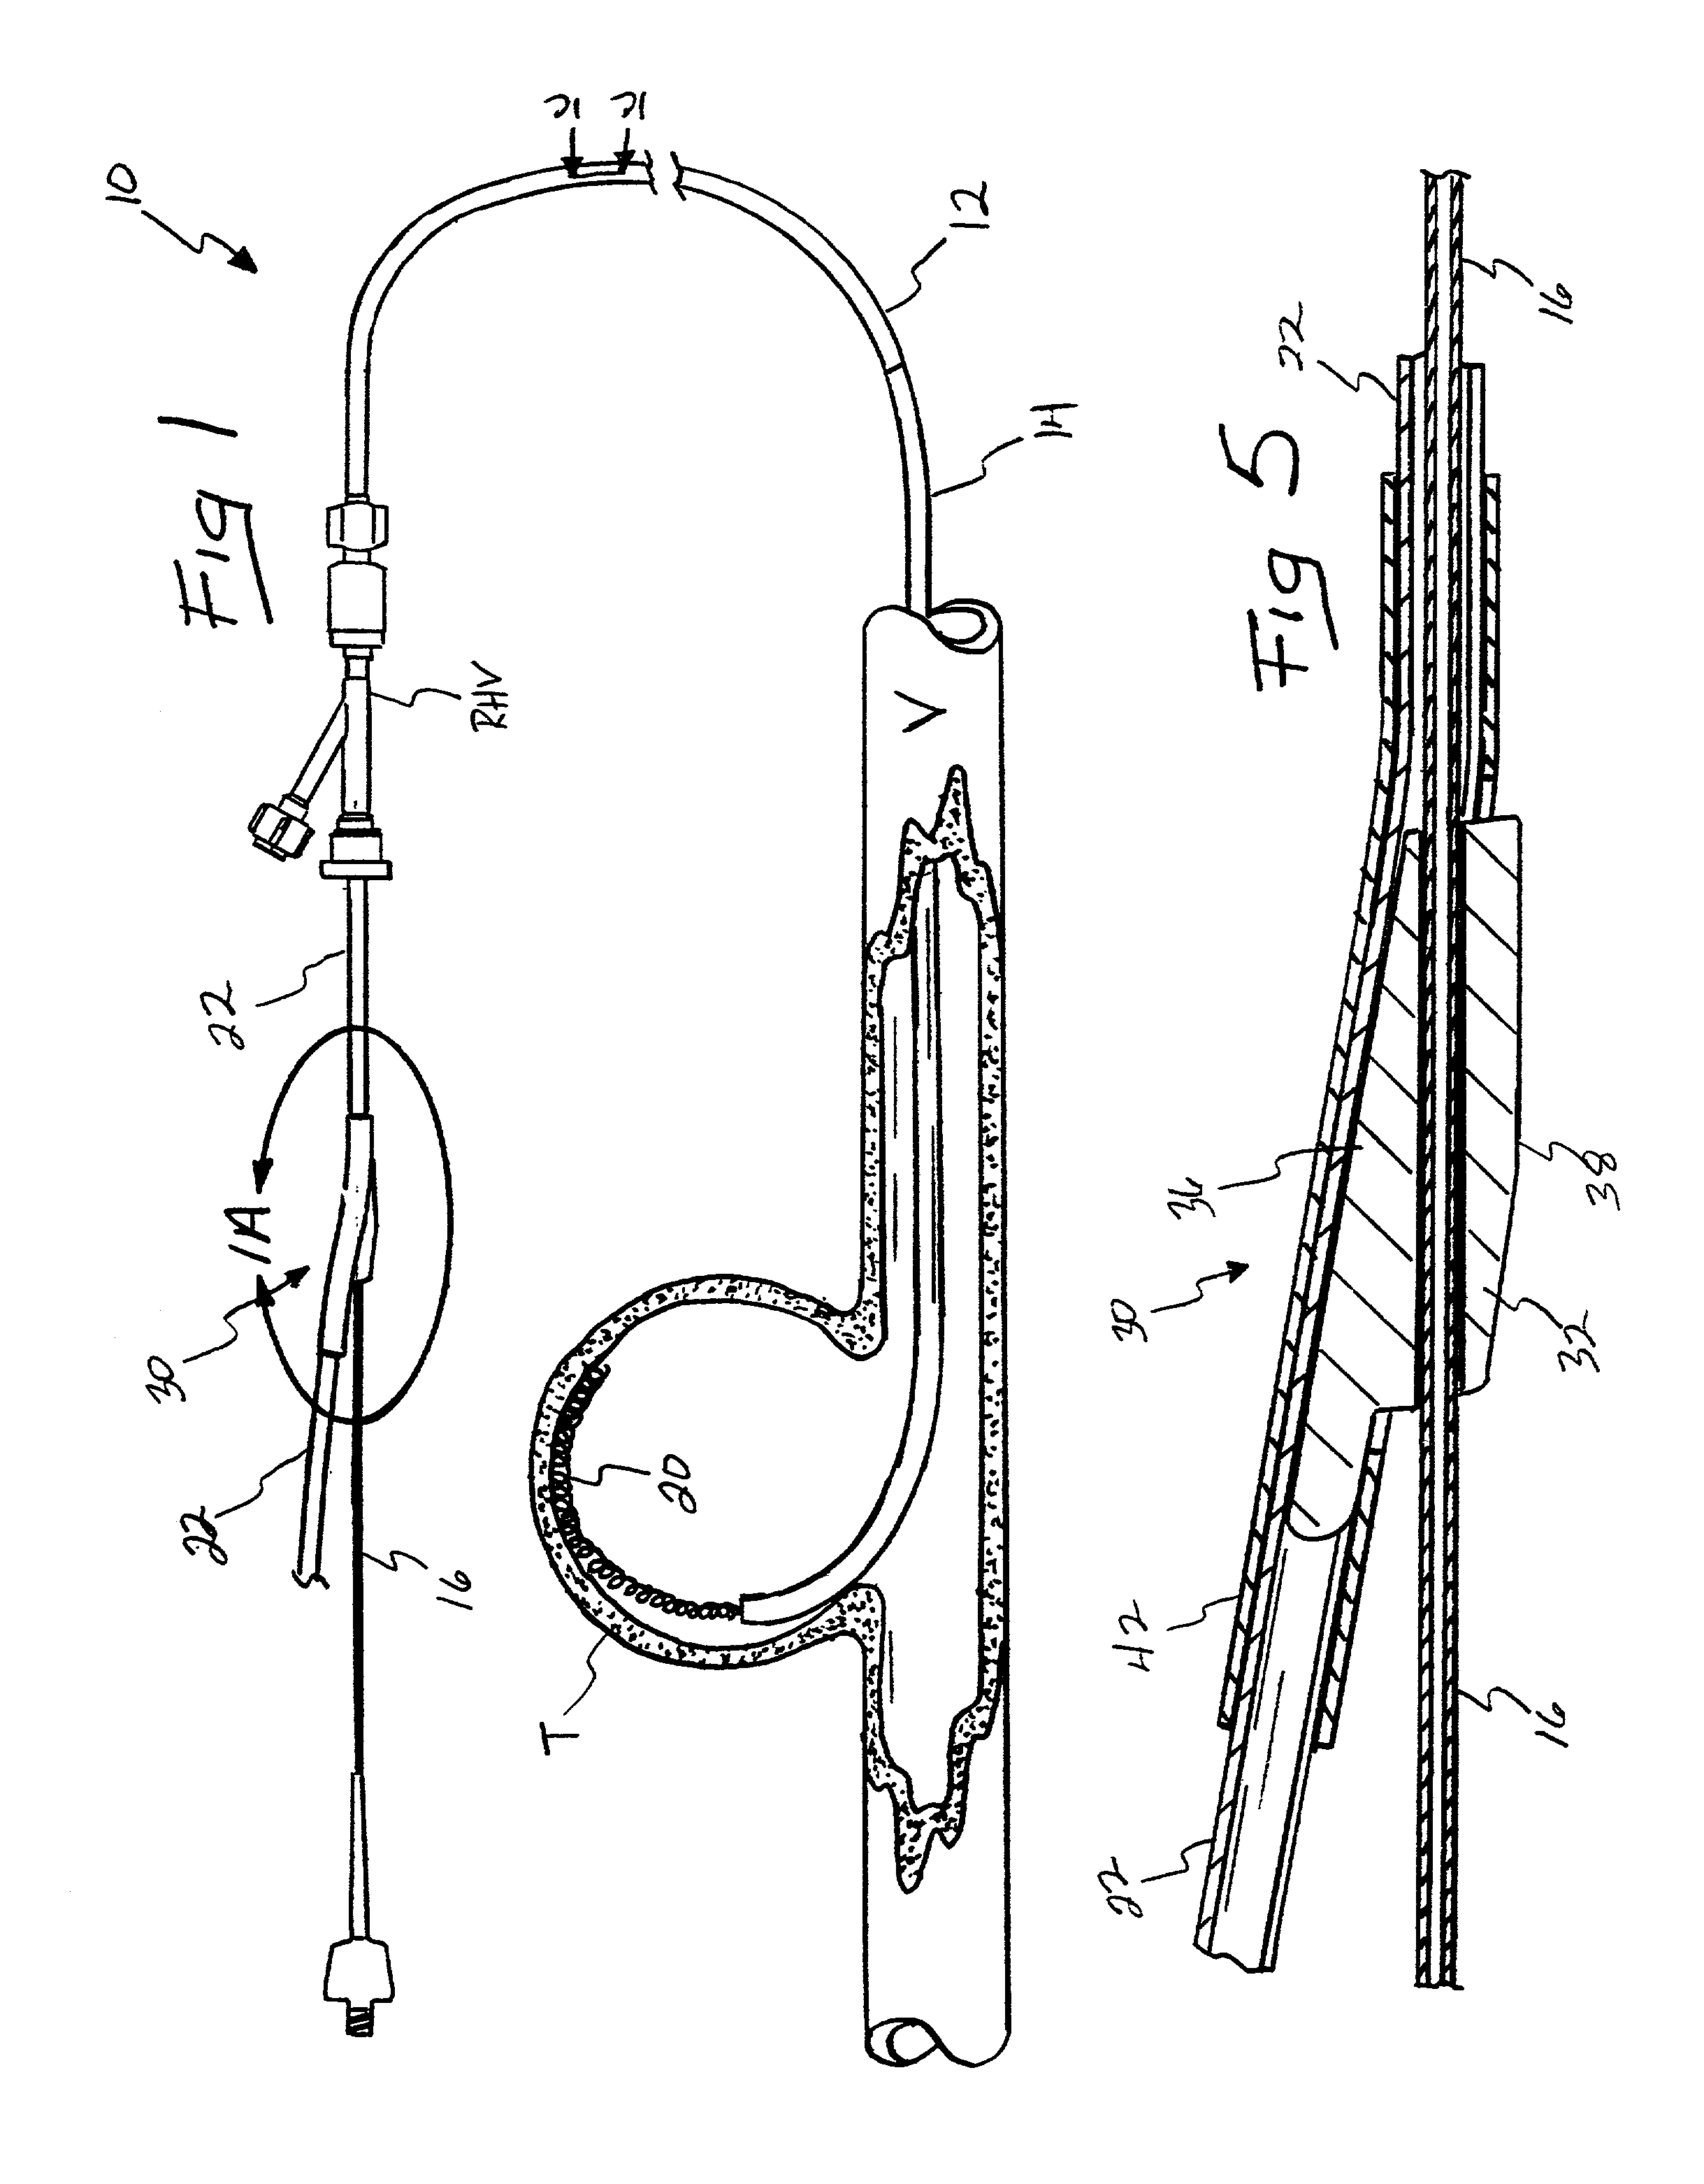 Endovascular catheter resheathing apparatus and related methods